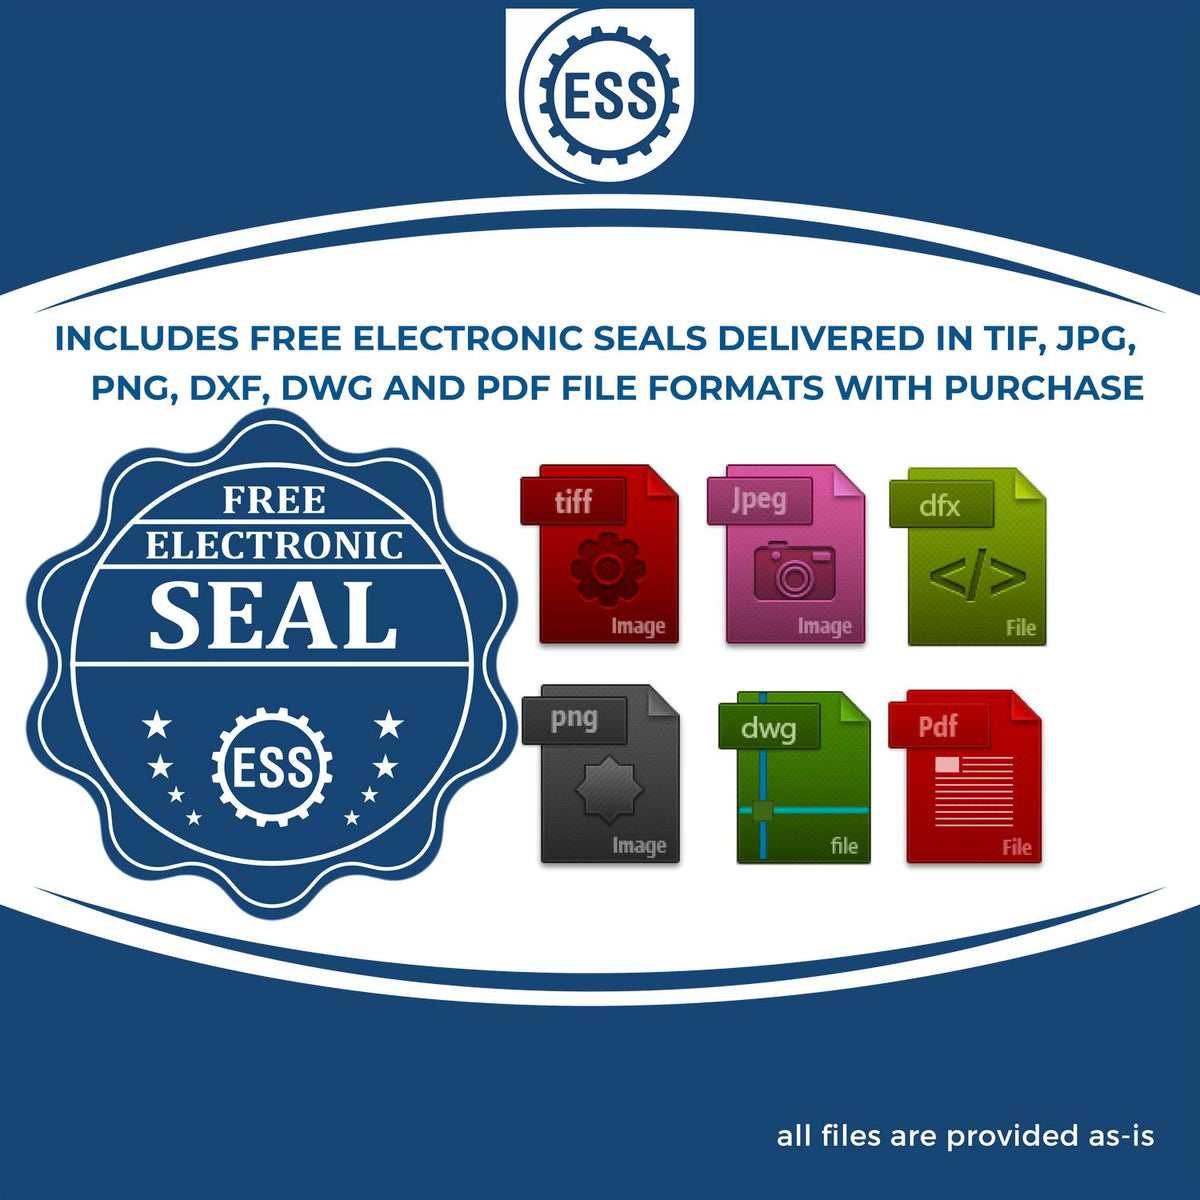 An infographic for the free electronic seal for the Heavy Duty Cast Iron Illinois Geologist Seal Embosser illustrating the different file type icons such as DXF, DWG, TIF, JPG and PNG.